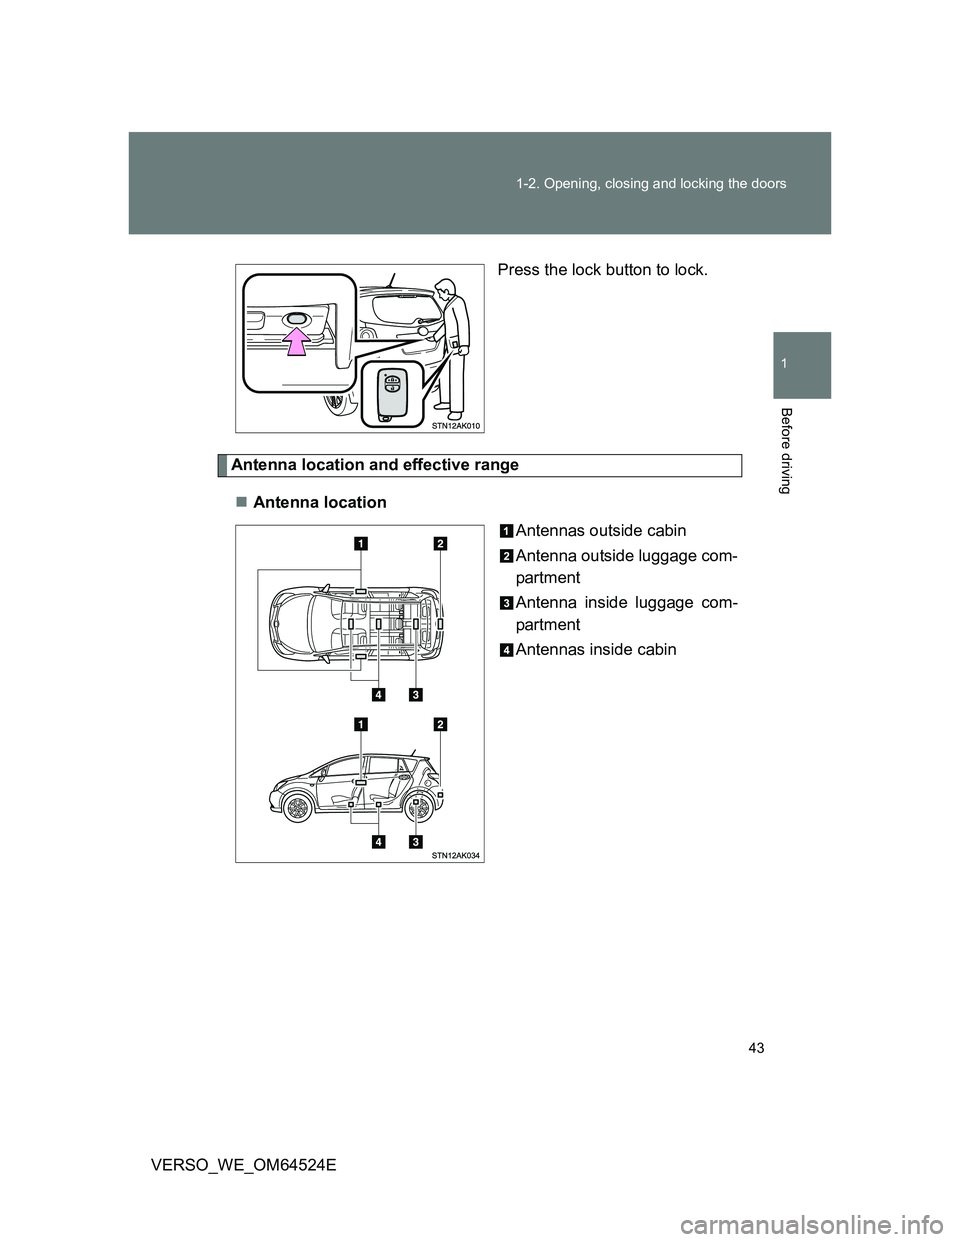 TOYOTA VERSO 2012  Owners Manual 43 1-2. Opening, closing and locking the doors
1
Before driving
VERSO_WE_OM64524EPress the lock button to lock.
Antenna location and effective range
Antenna location
Antennas outside cabin
Antenna 